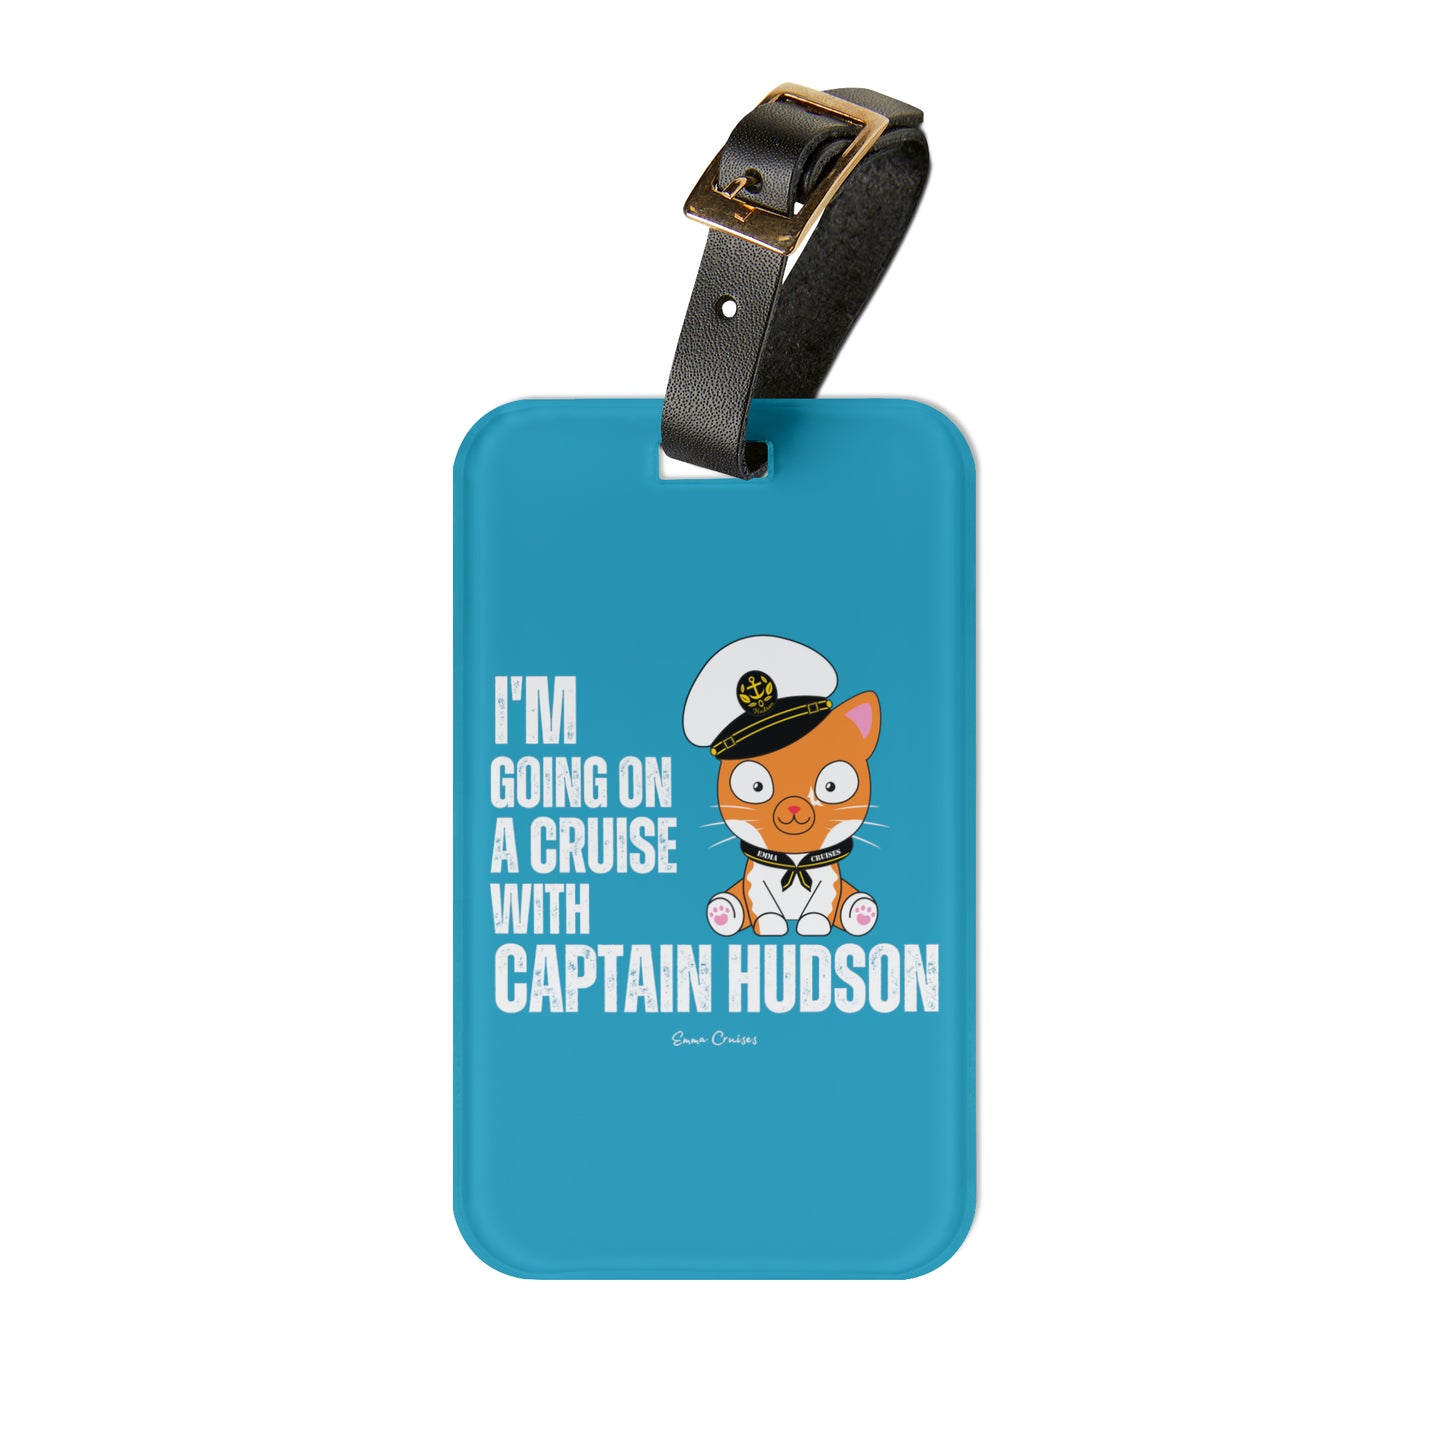 I'm Going on a Cruise With Captain Hudson - Luggage Tag